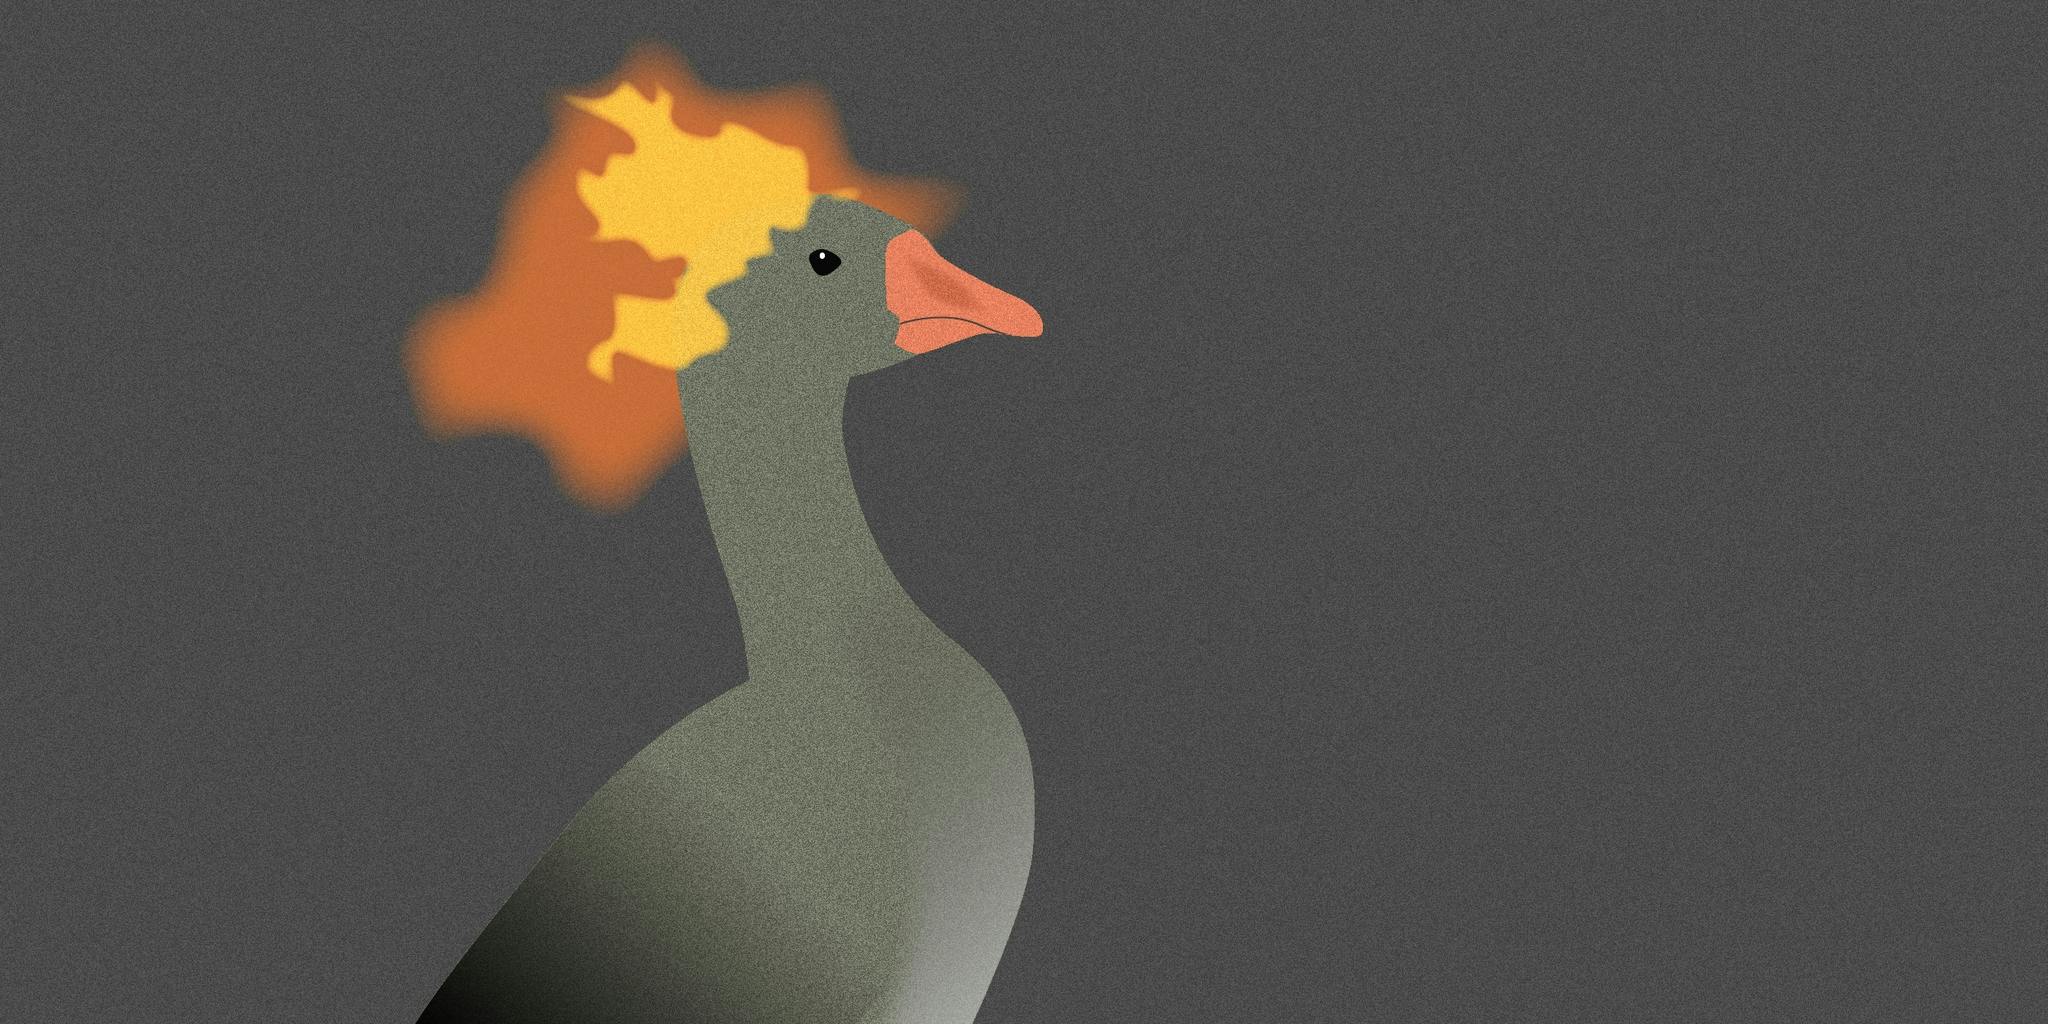 This Flaming Goose Meme Is So Lit That Facebook Is Actually Censoring It The Daily Dot